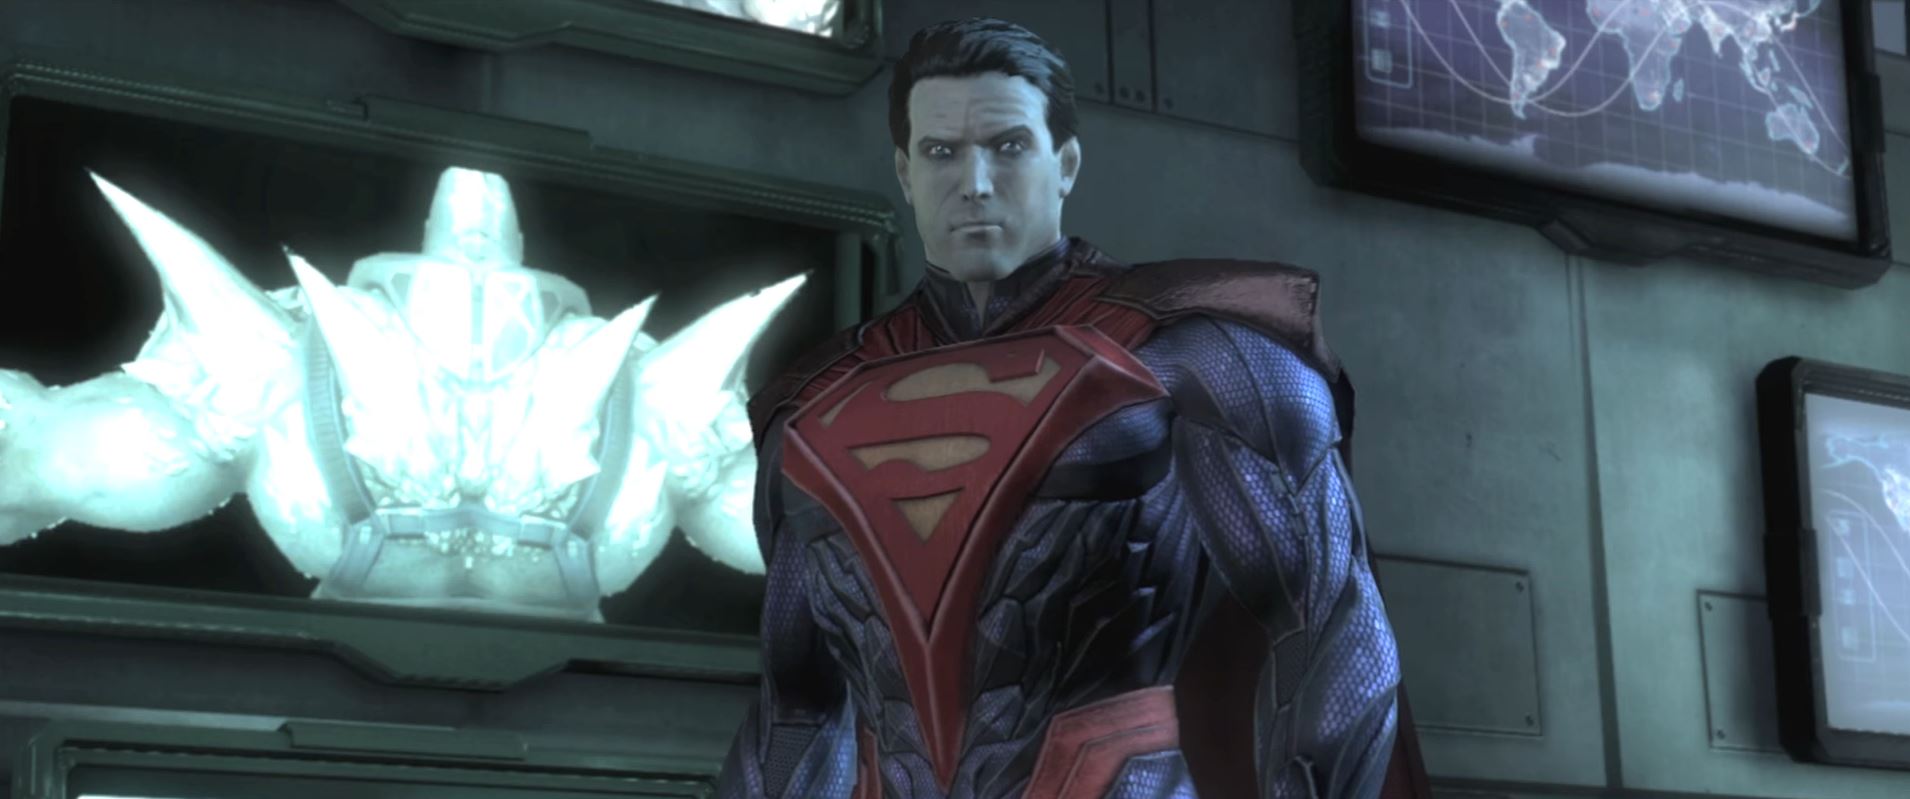 Evil Superman stares at the camera in Injustice: Gods Among Us.